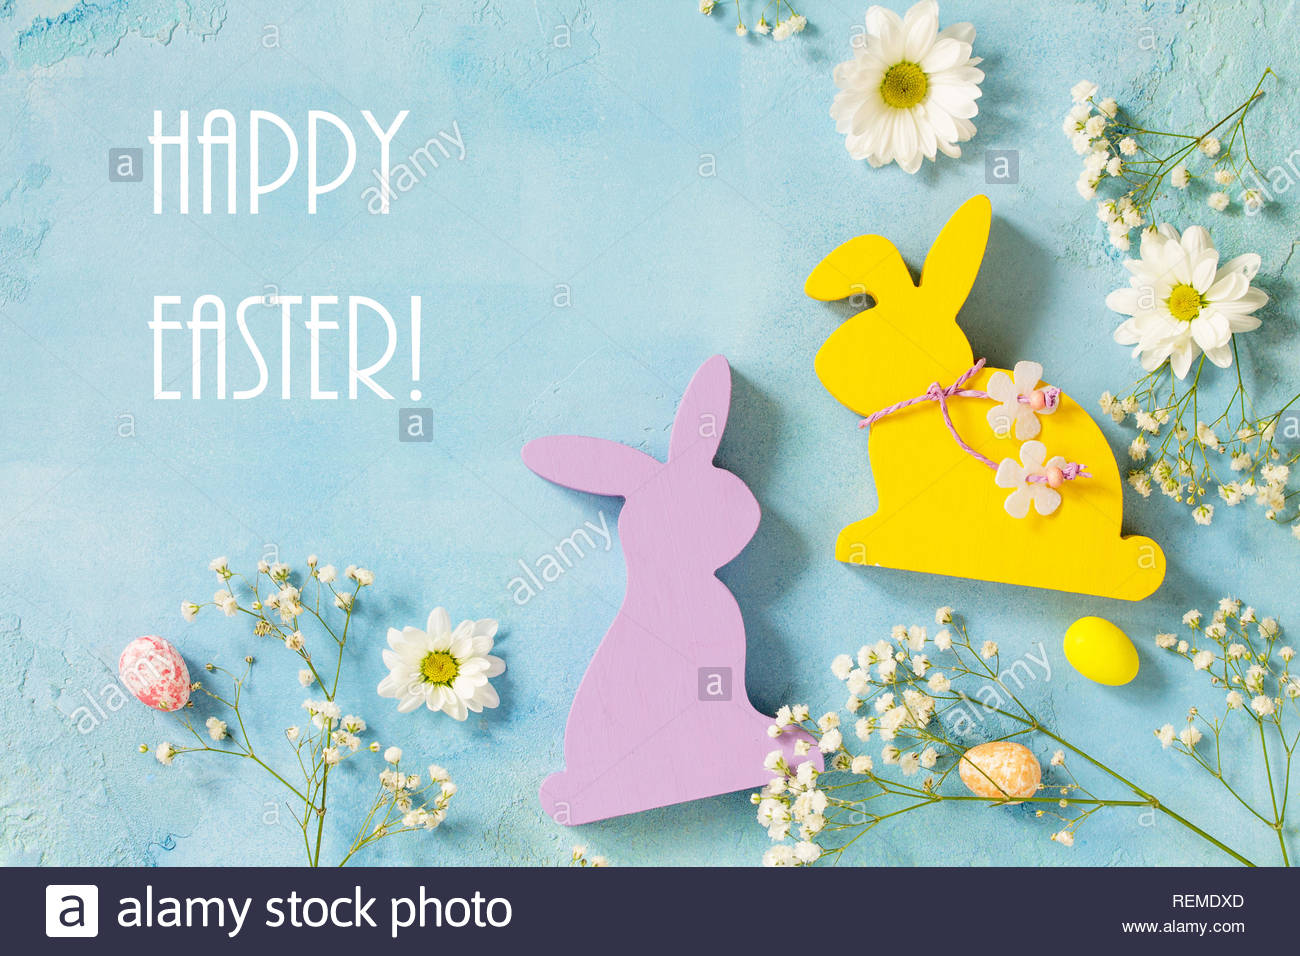 Happy Easter Congratulatory easter background Easter eggs